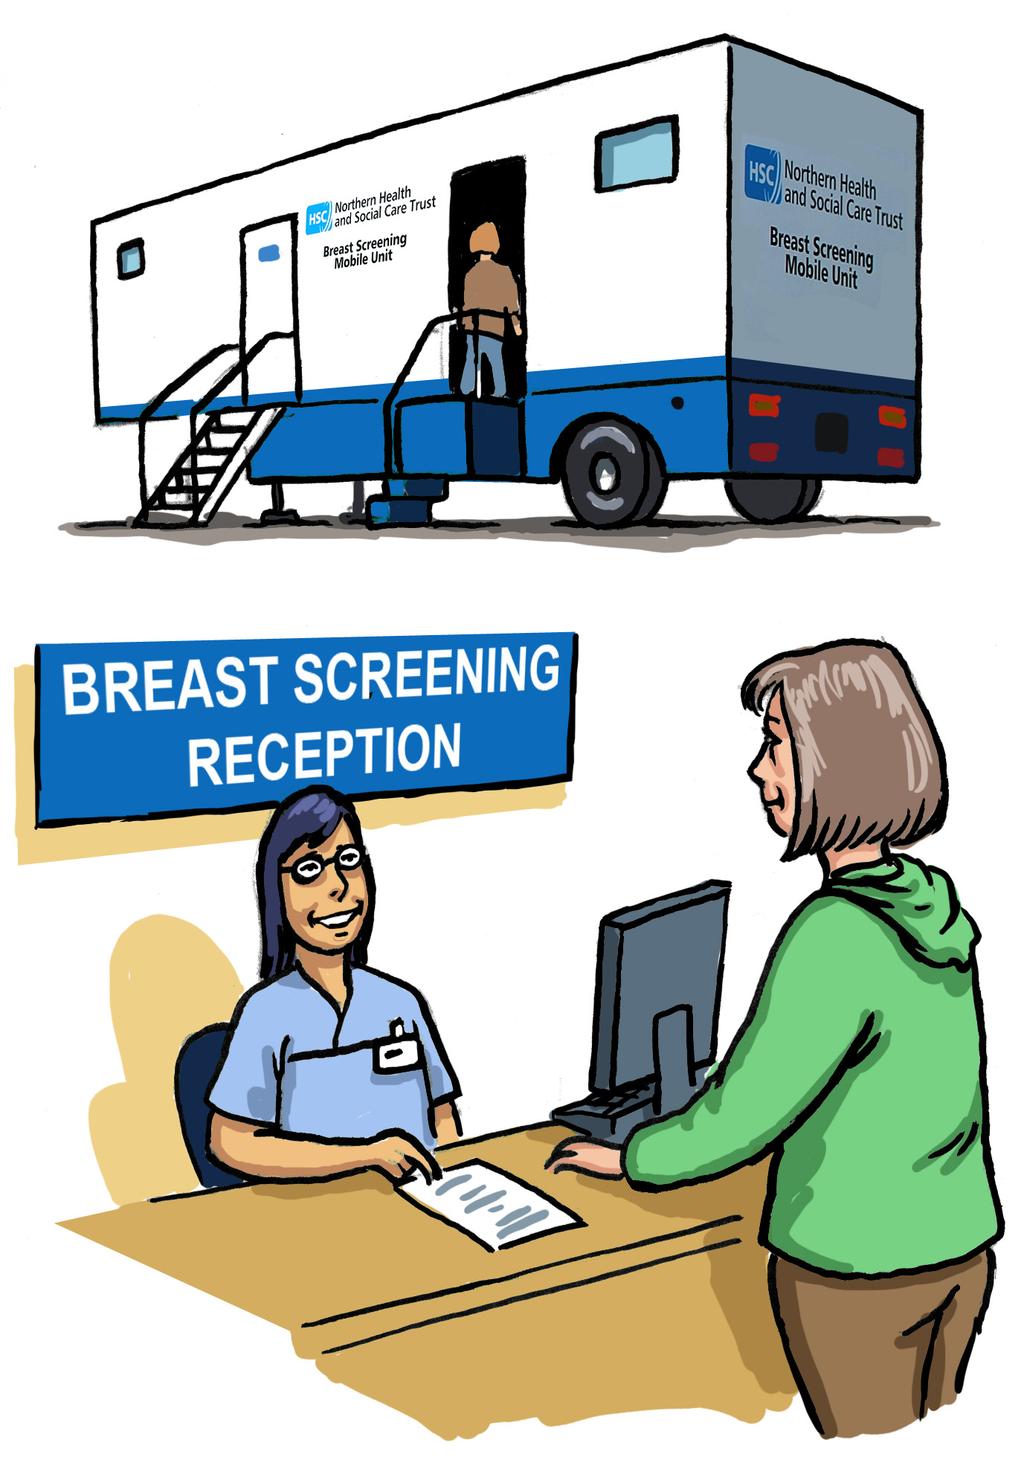 Does screening stop you getting breast cancer? No. Screening can find cancer early, before it can be seen or felt, but it can only find cancer if it is already there.